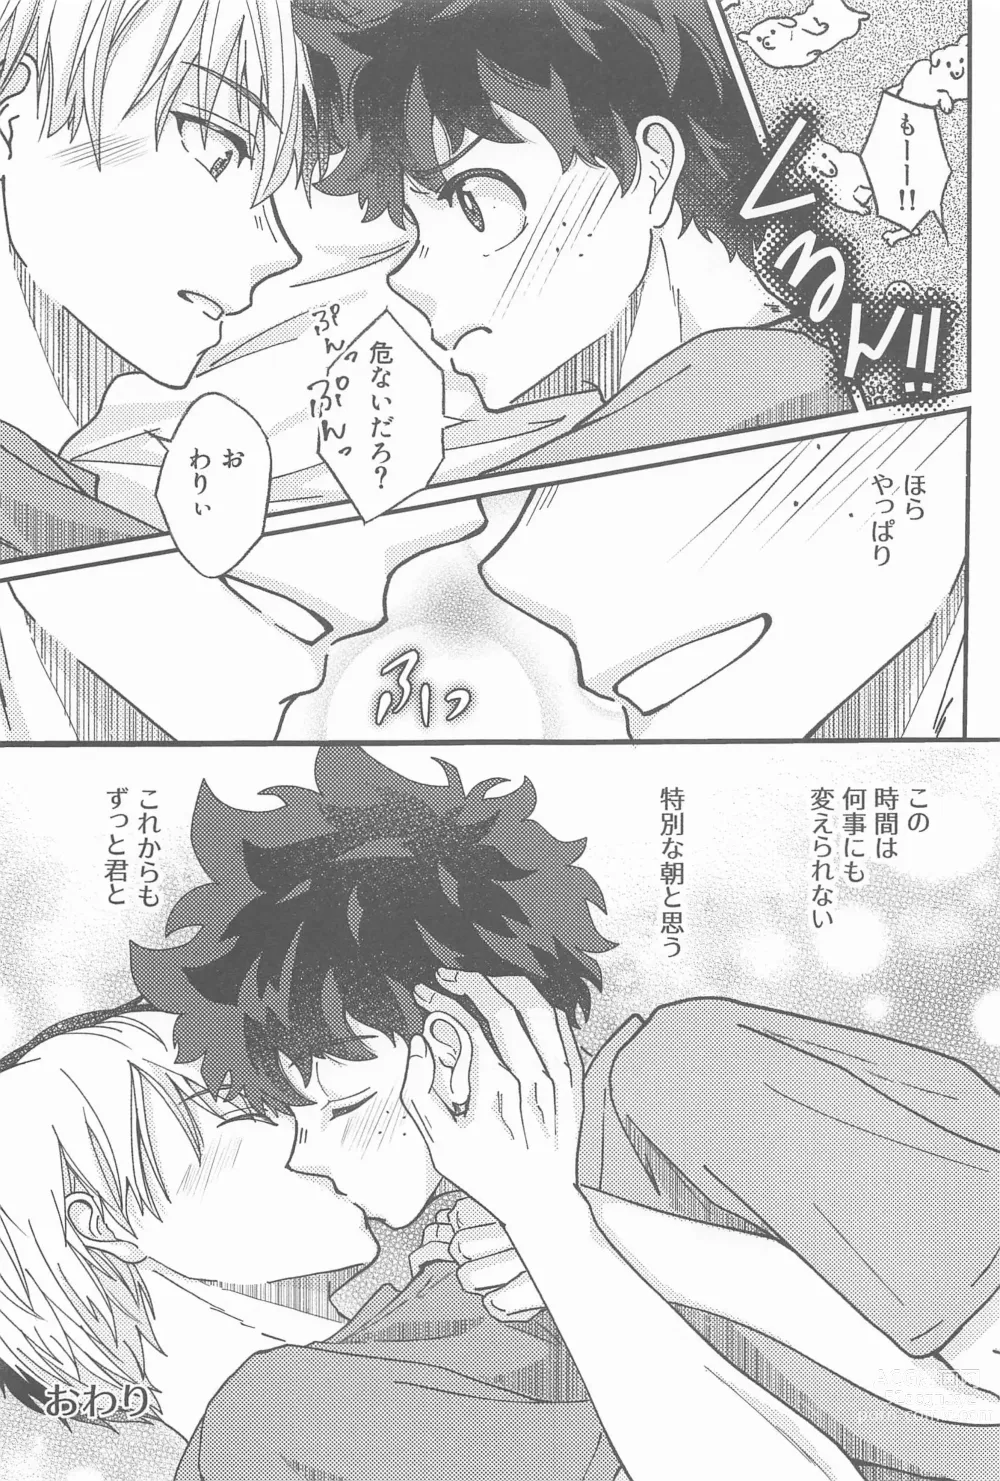 Page 44 of doujinshi Second Sweet